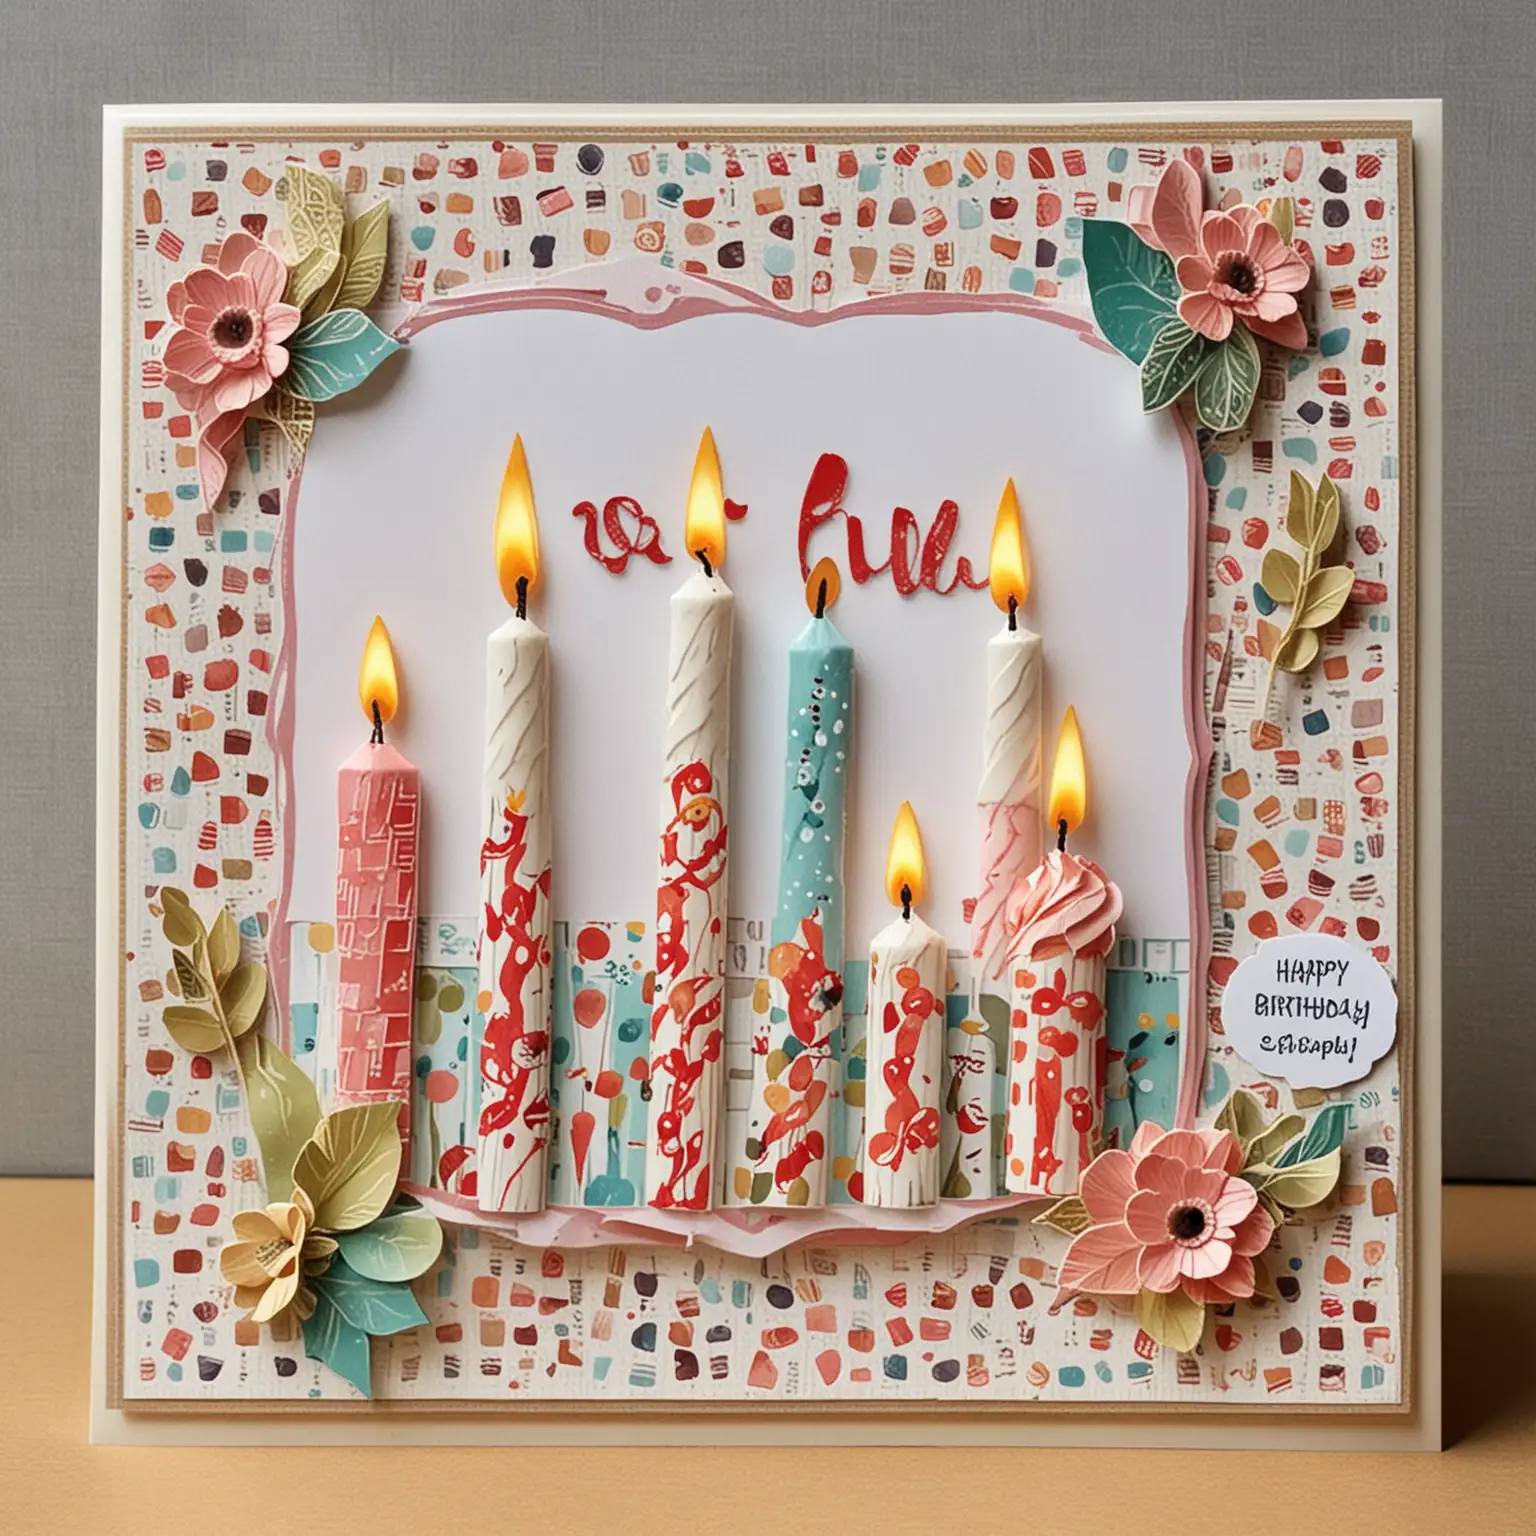 Adult Birthday Celebration Scrapbooking Card with Candles